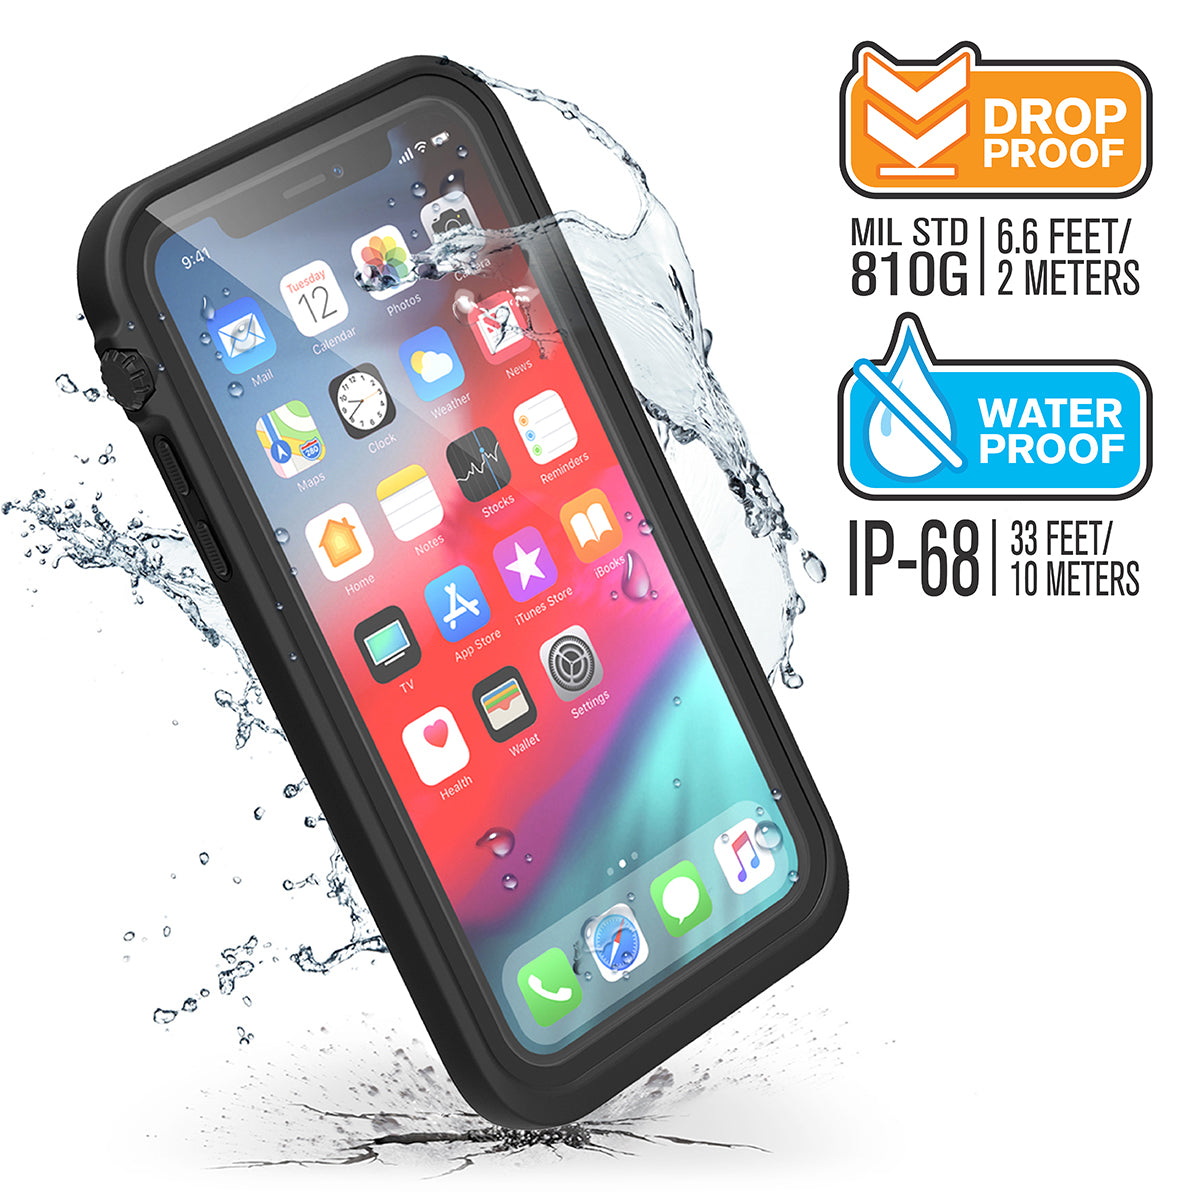 Catalyst iphone x/xr/xs/xs max waterproof case x showing-how-drop-proof-and-water-proof-the-case-is-in stealth-black black text reads drop proof MIL STD 810G 6.6 FEET 2 METERS WATER PROOF IP-68 33 FEET 10 METERS